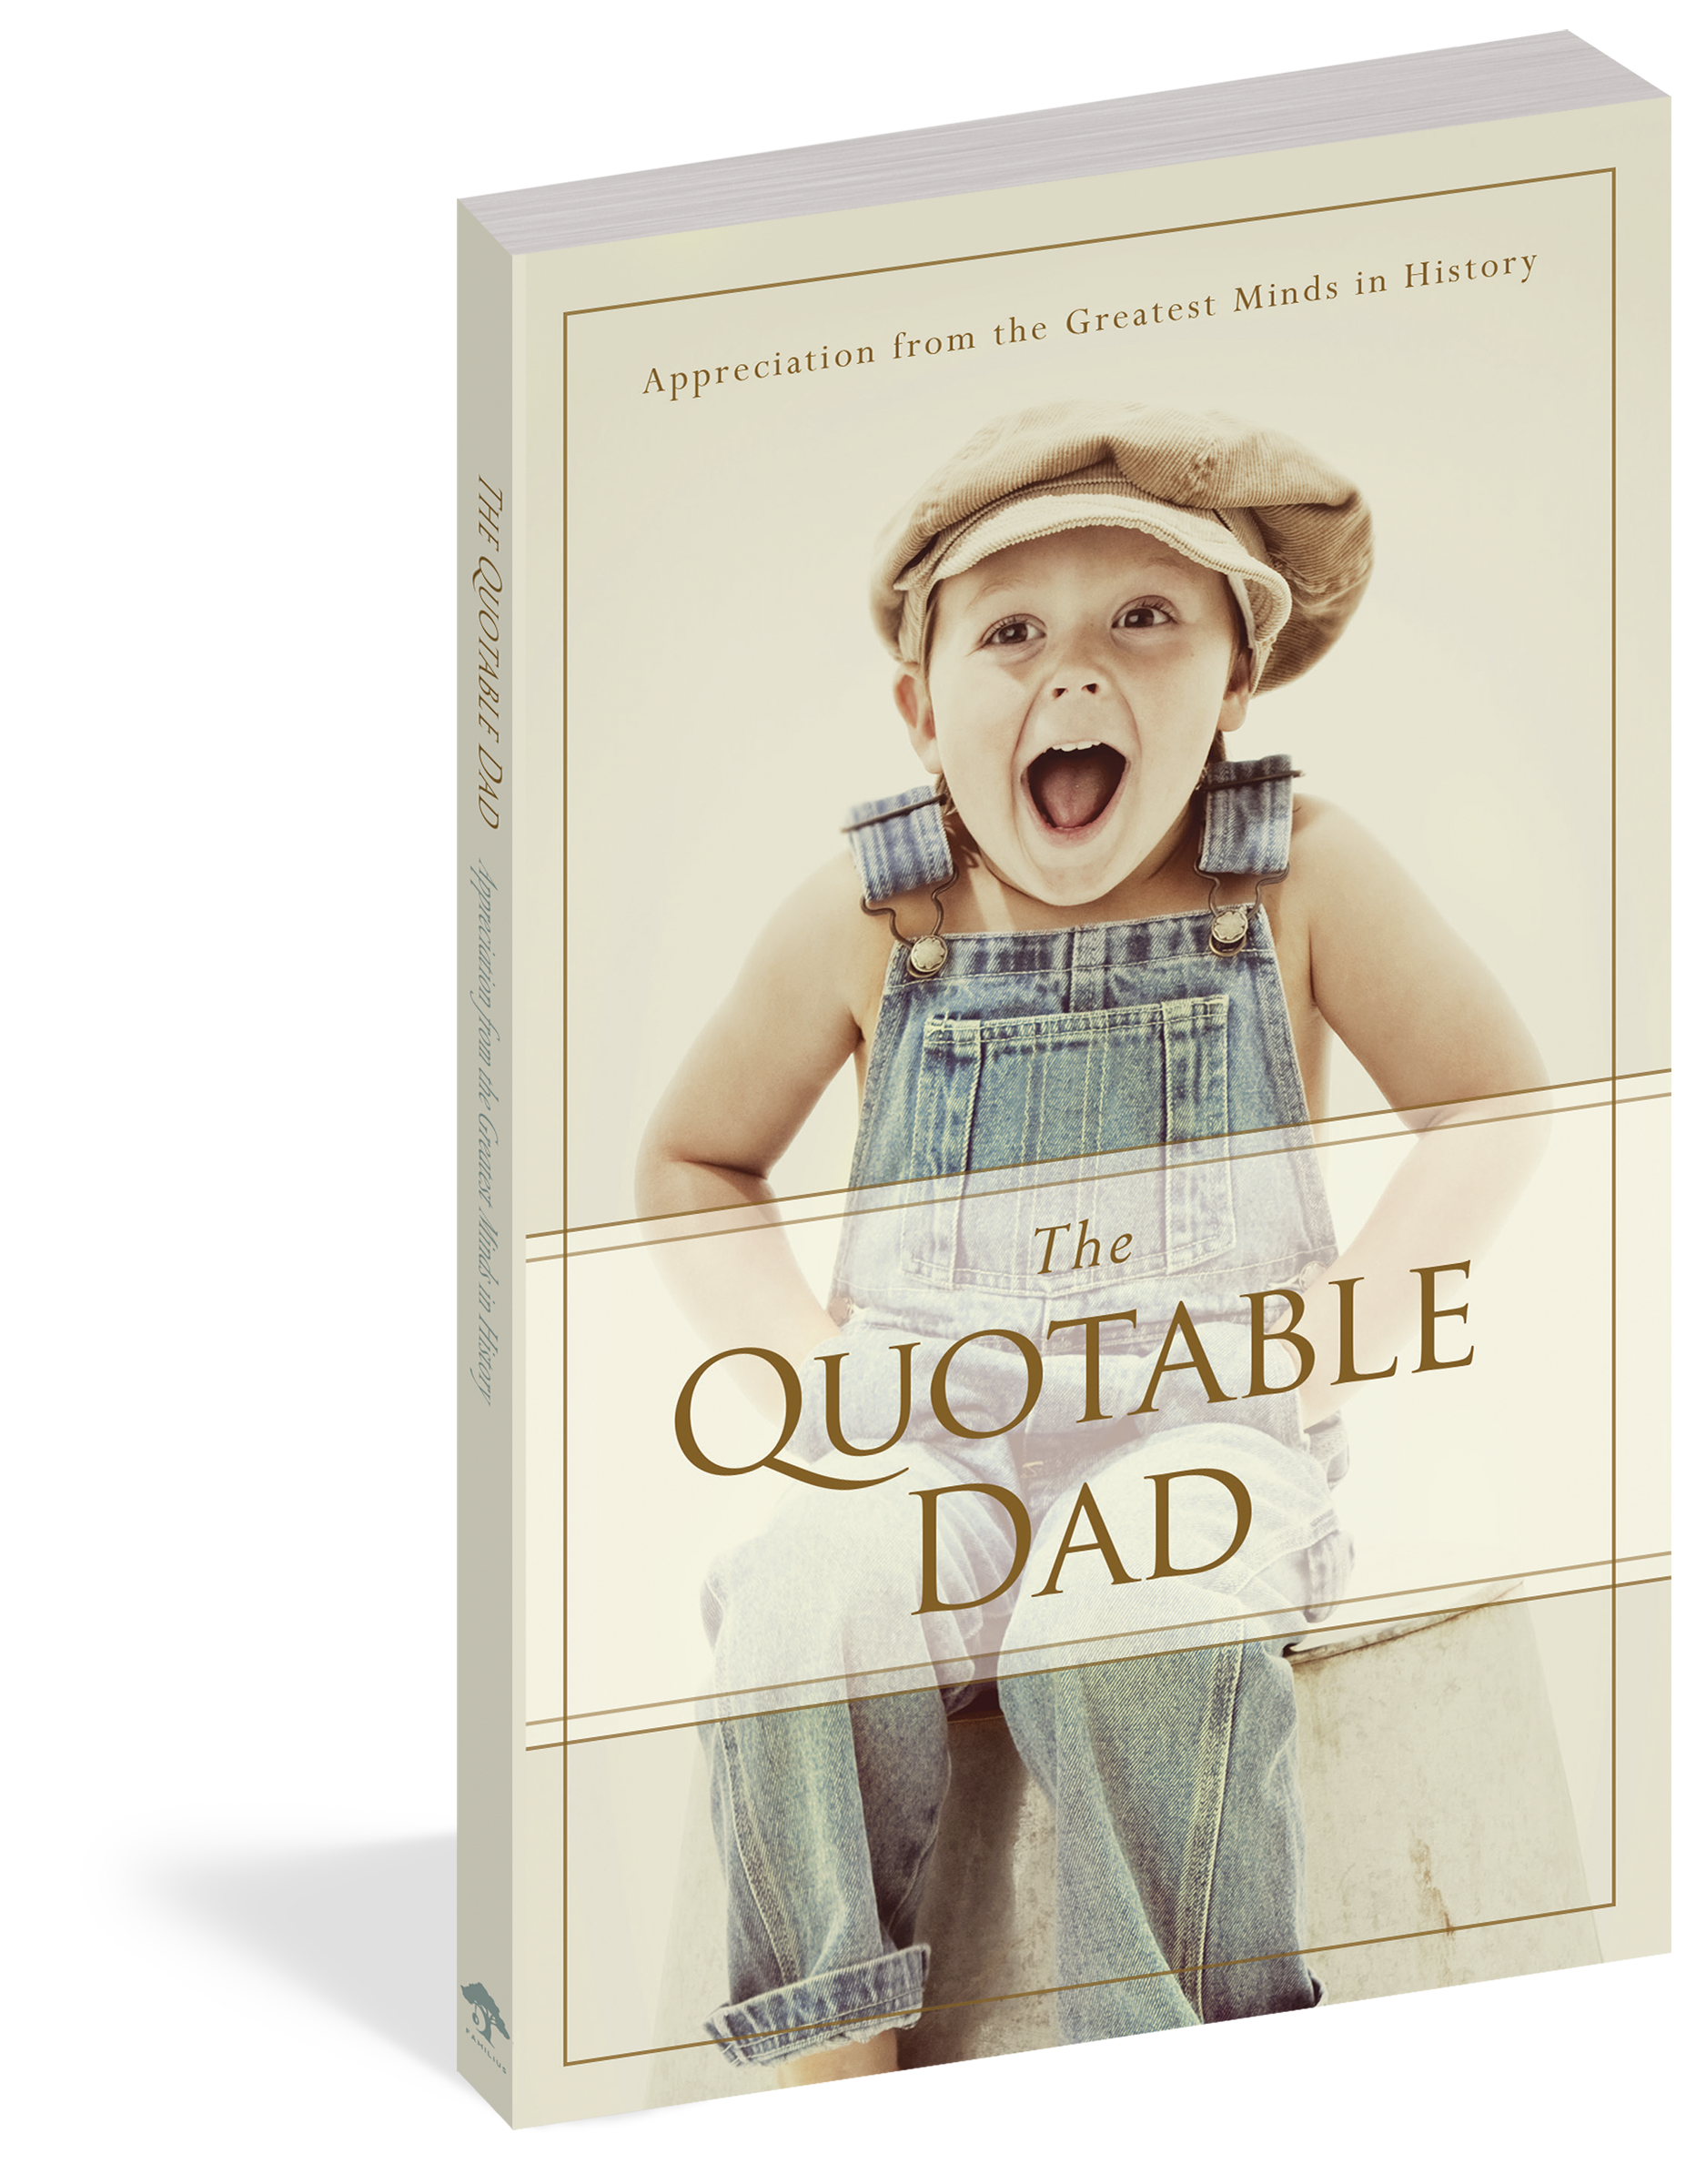 The cover of the book The Quotable Dad.